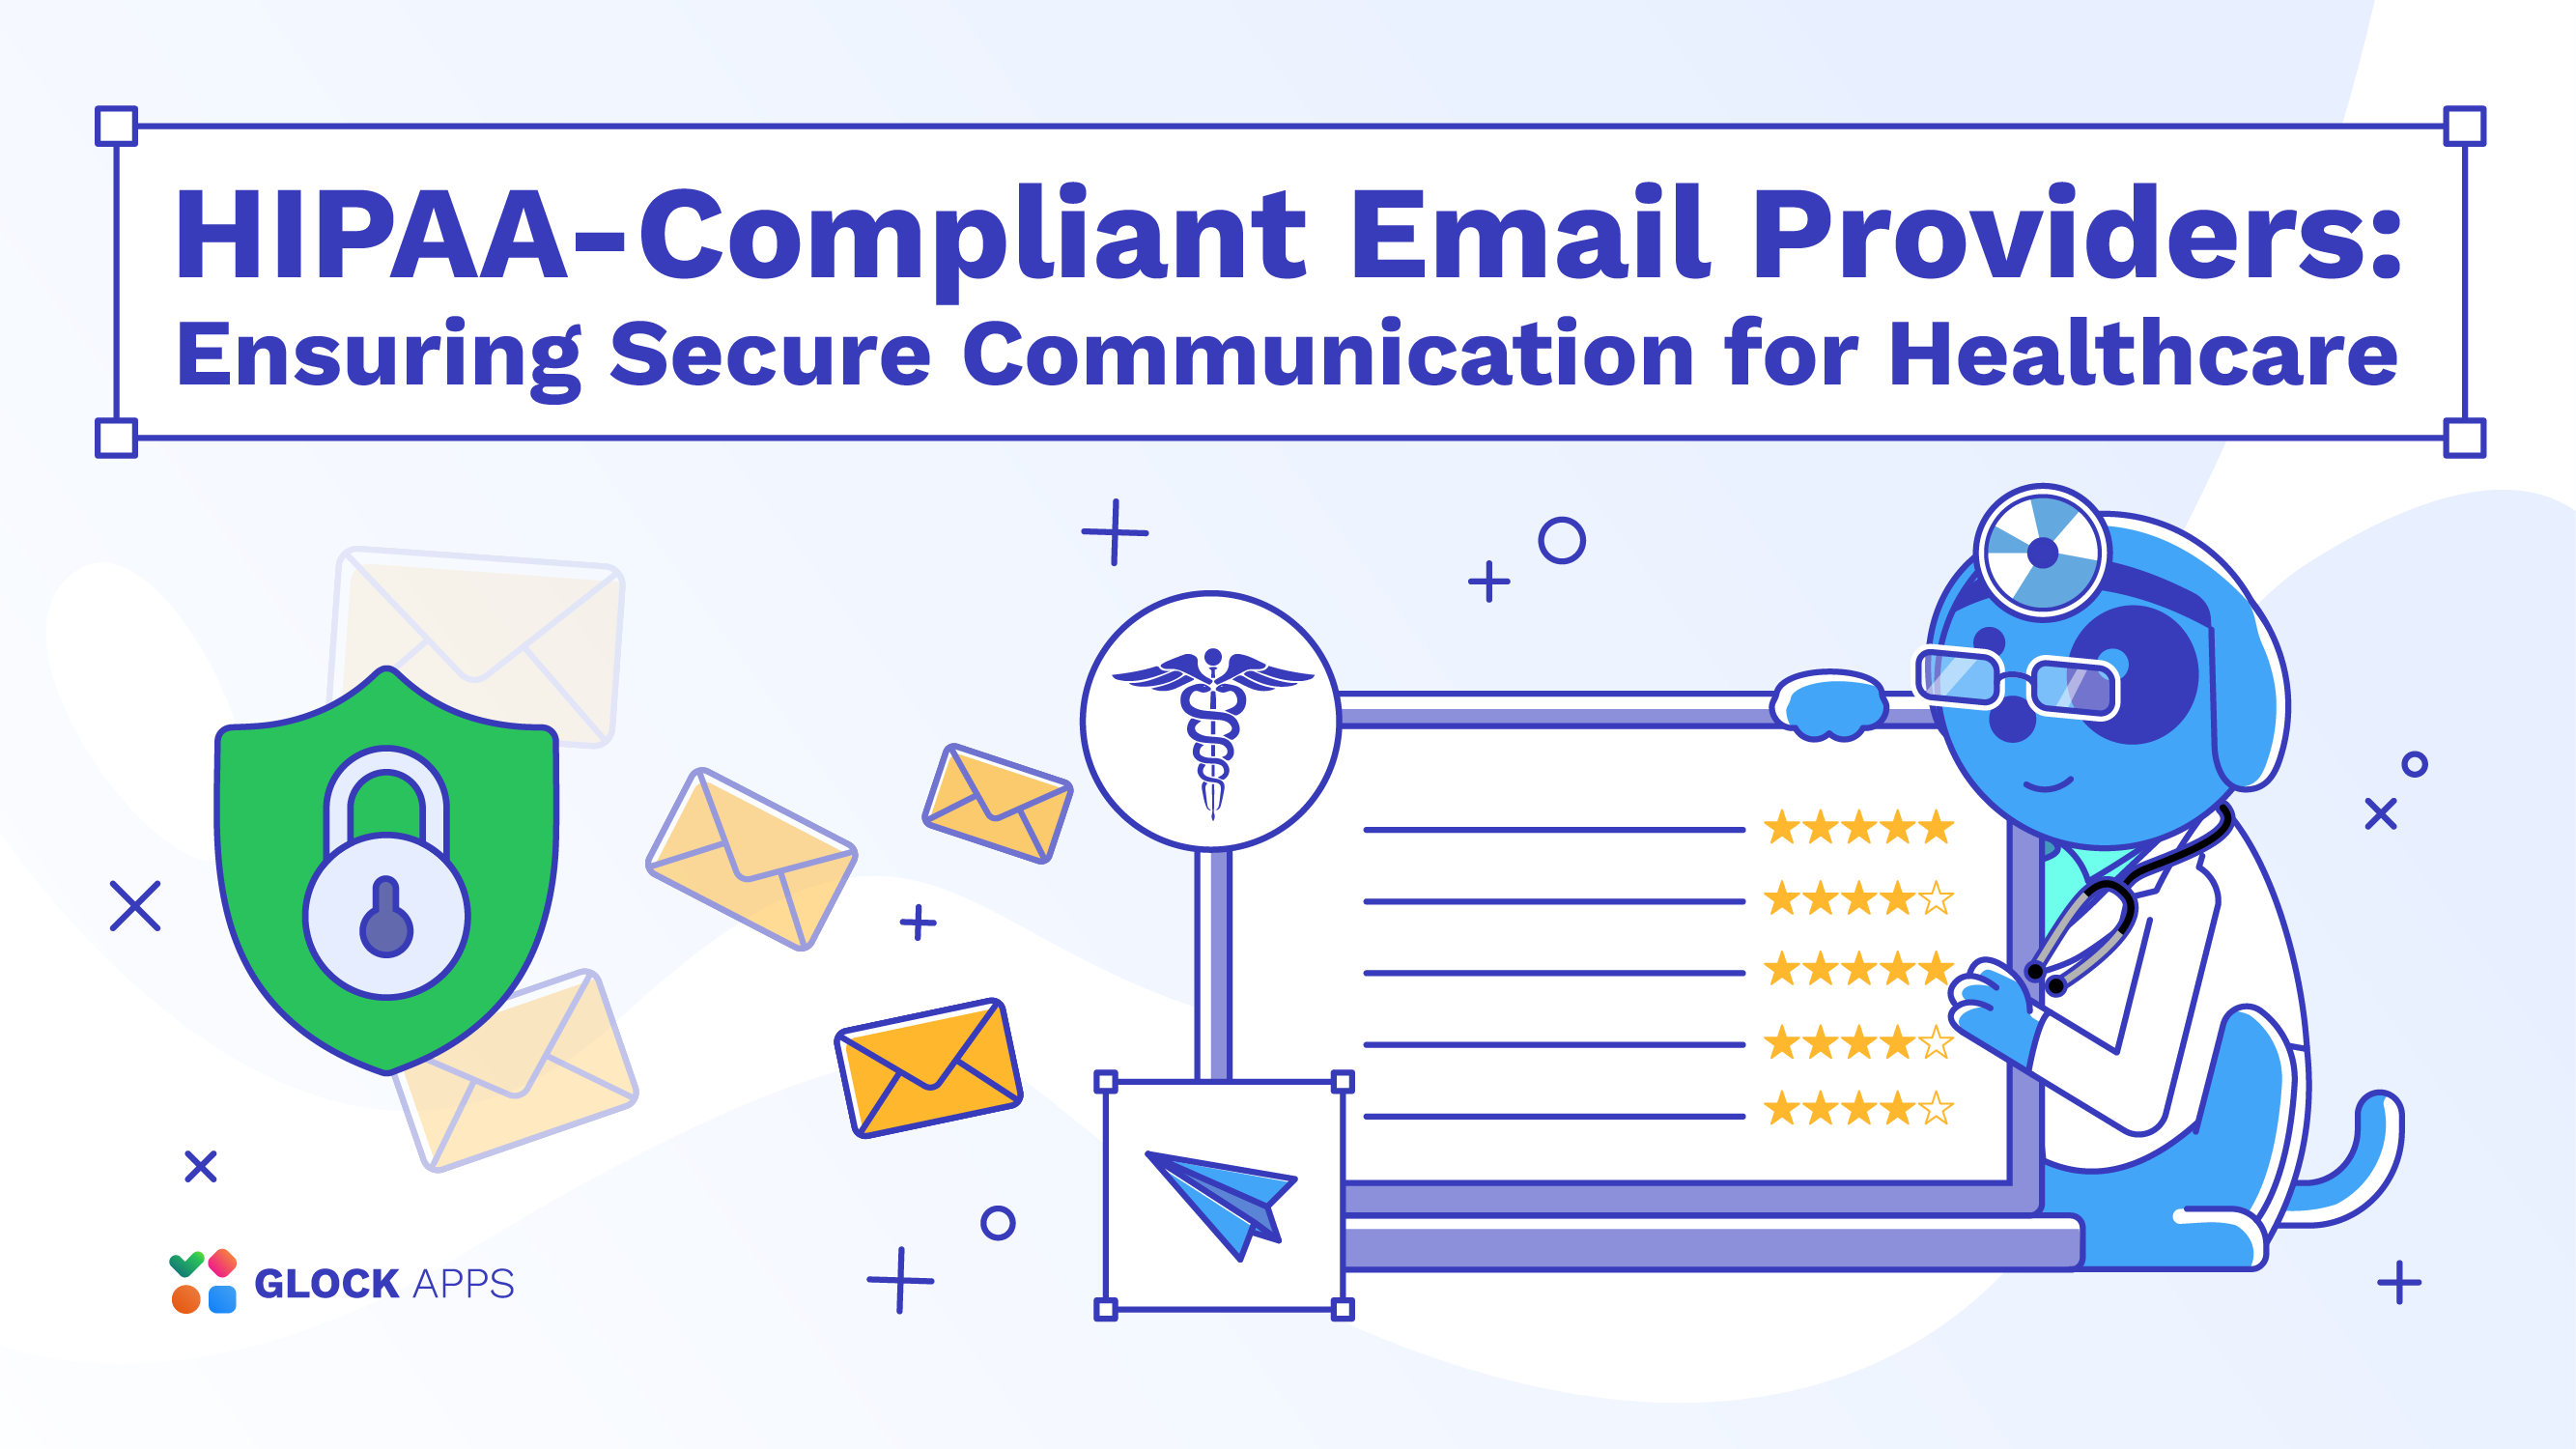 HIPAA-Compliant Email Providers